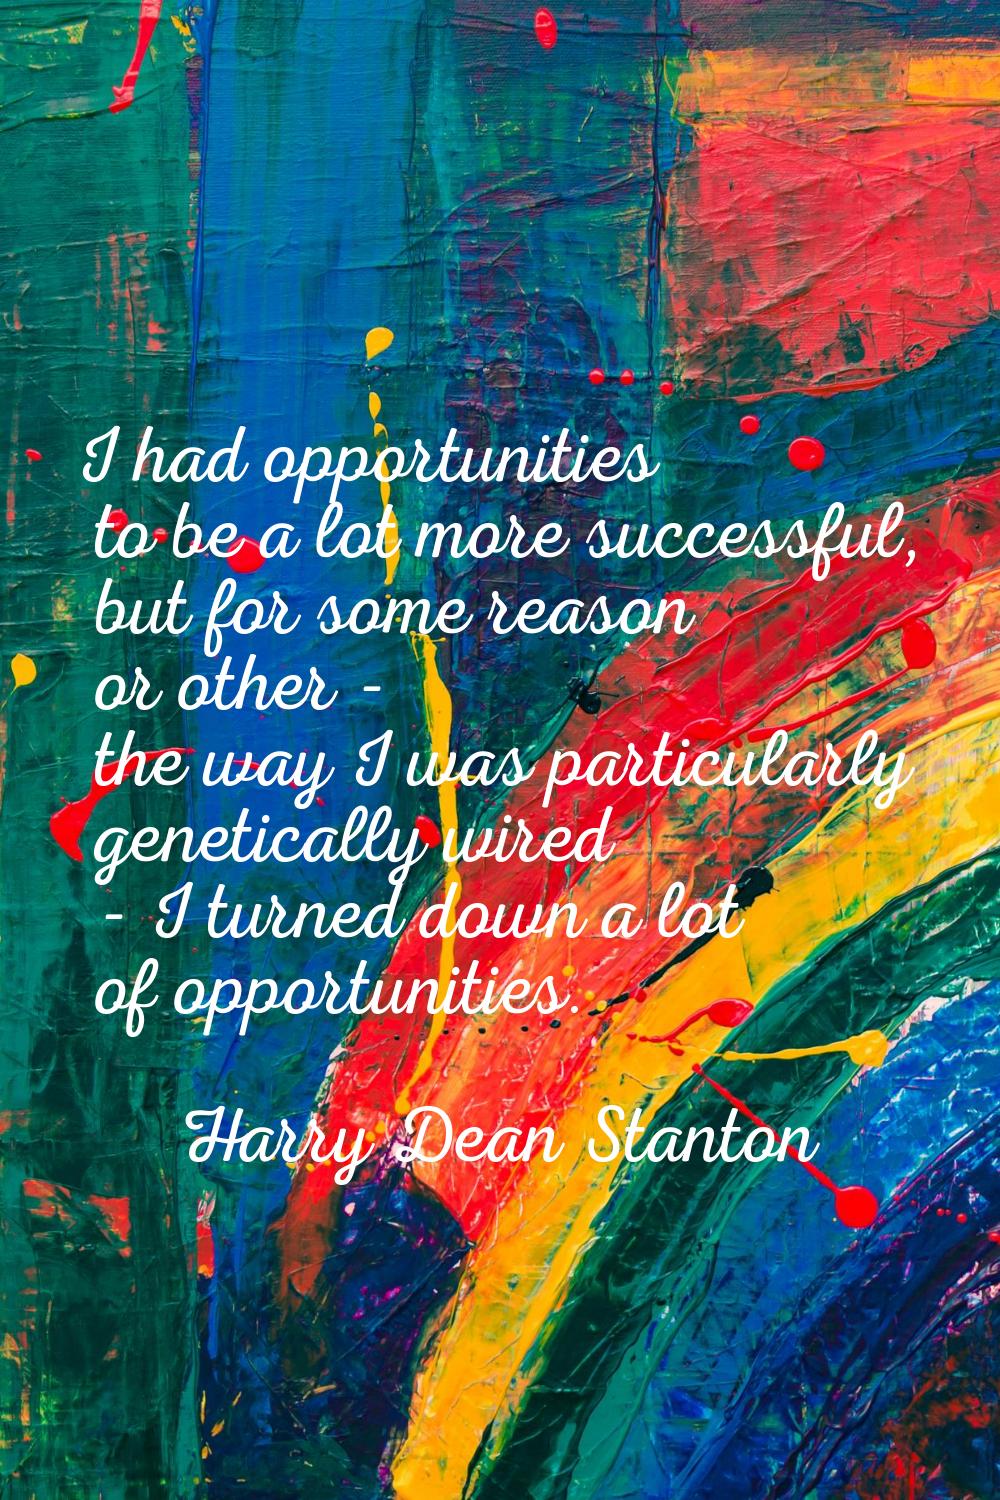 I had opportunities to be a lot more successful, but for some reason or other - the way I was parti